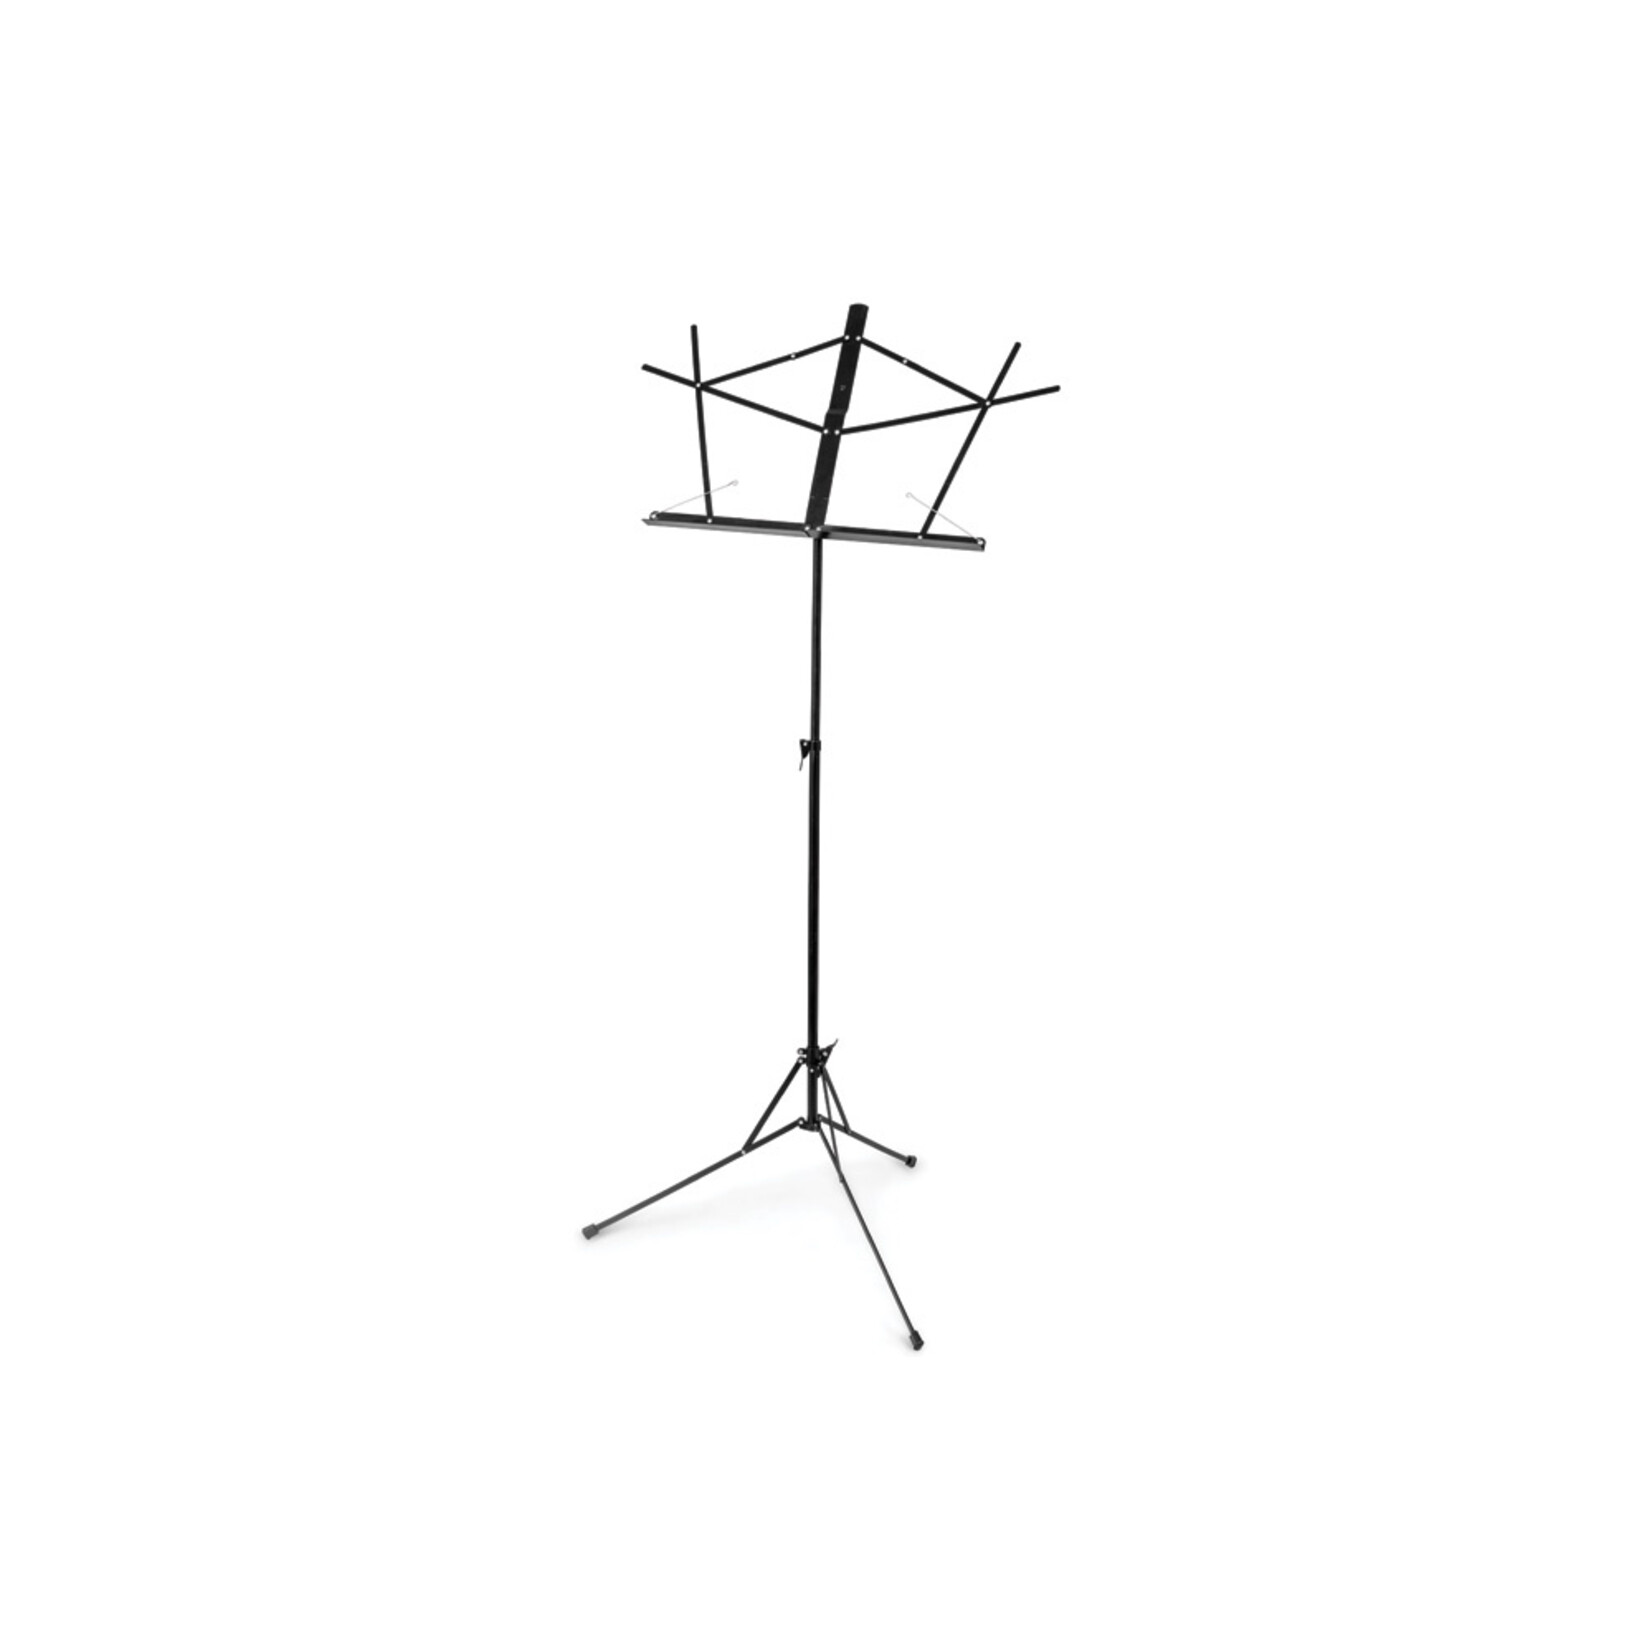 Nomad NBS-1103 Lightweight EZ-Angle Music Stand - Black